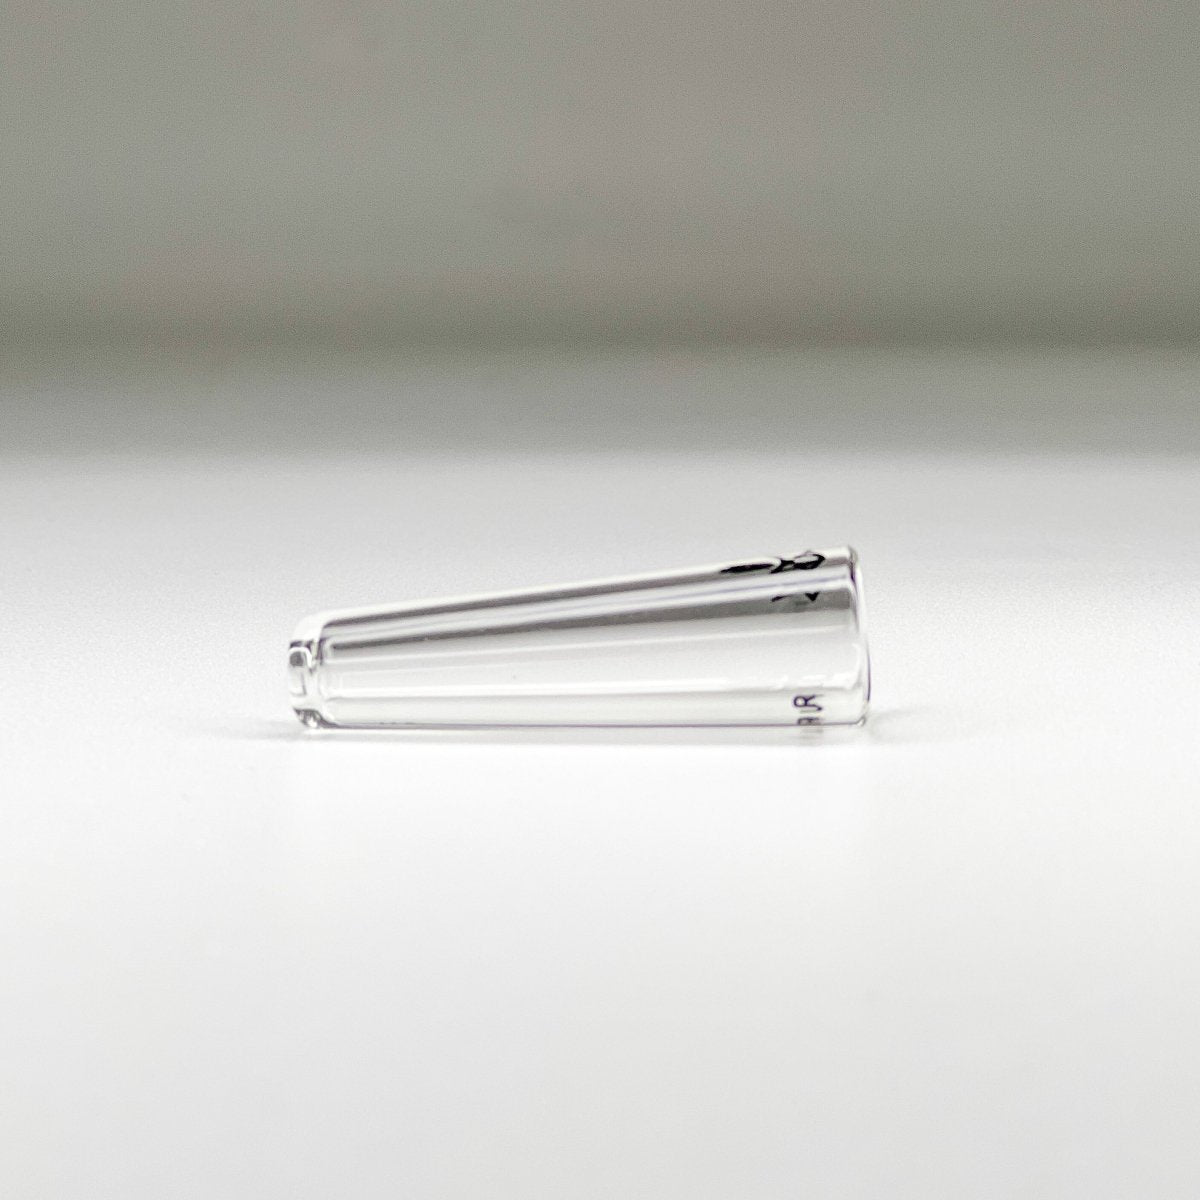 PERSONAL CANNAMOLD & GLASS TIP - Fits 2-4g